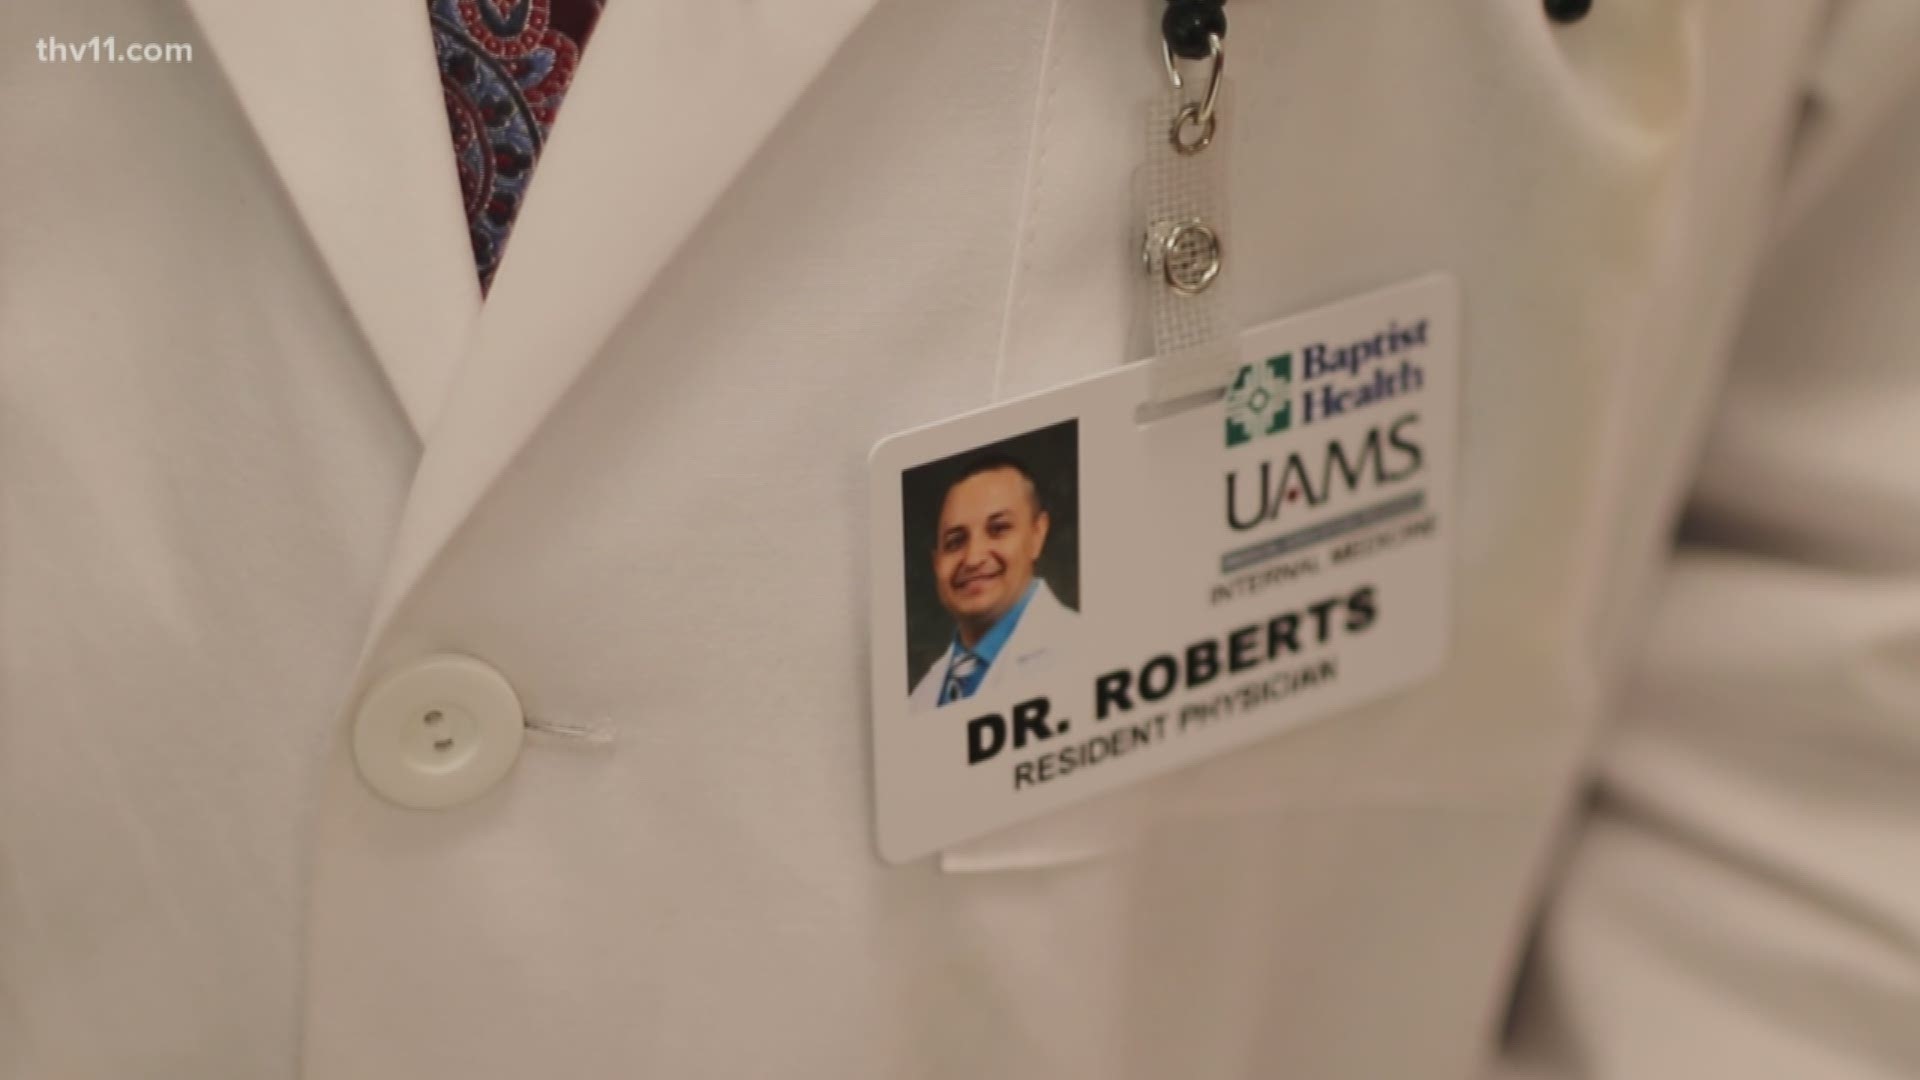 Baptist Health and UAMS are teaming up in hopes of combating an issue that affects every Arkansan.